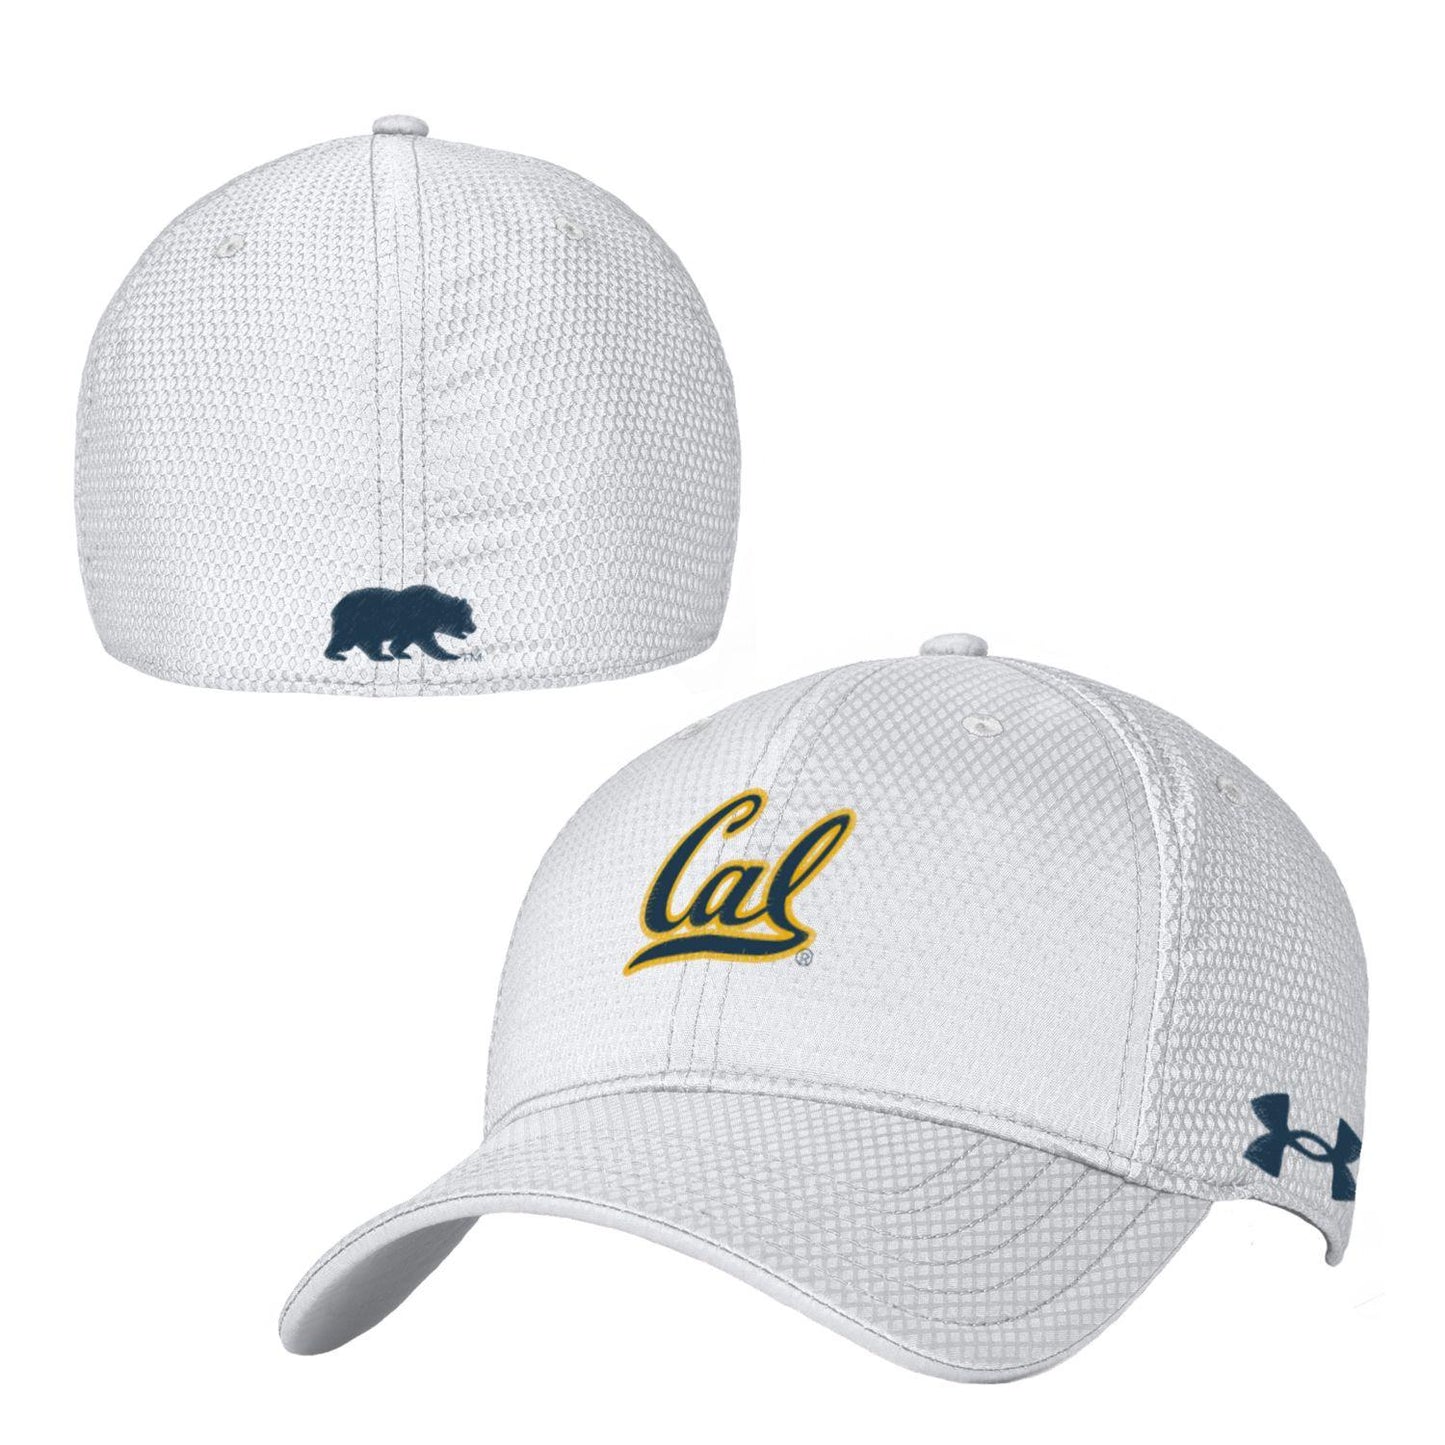 U.C. Berkeley Cal embroidered men's stretch fit performance dry Under Armour hat-Shop College Wear